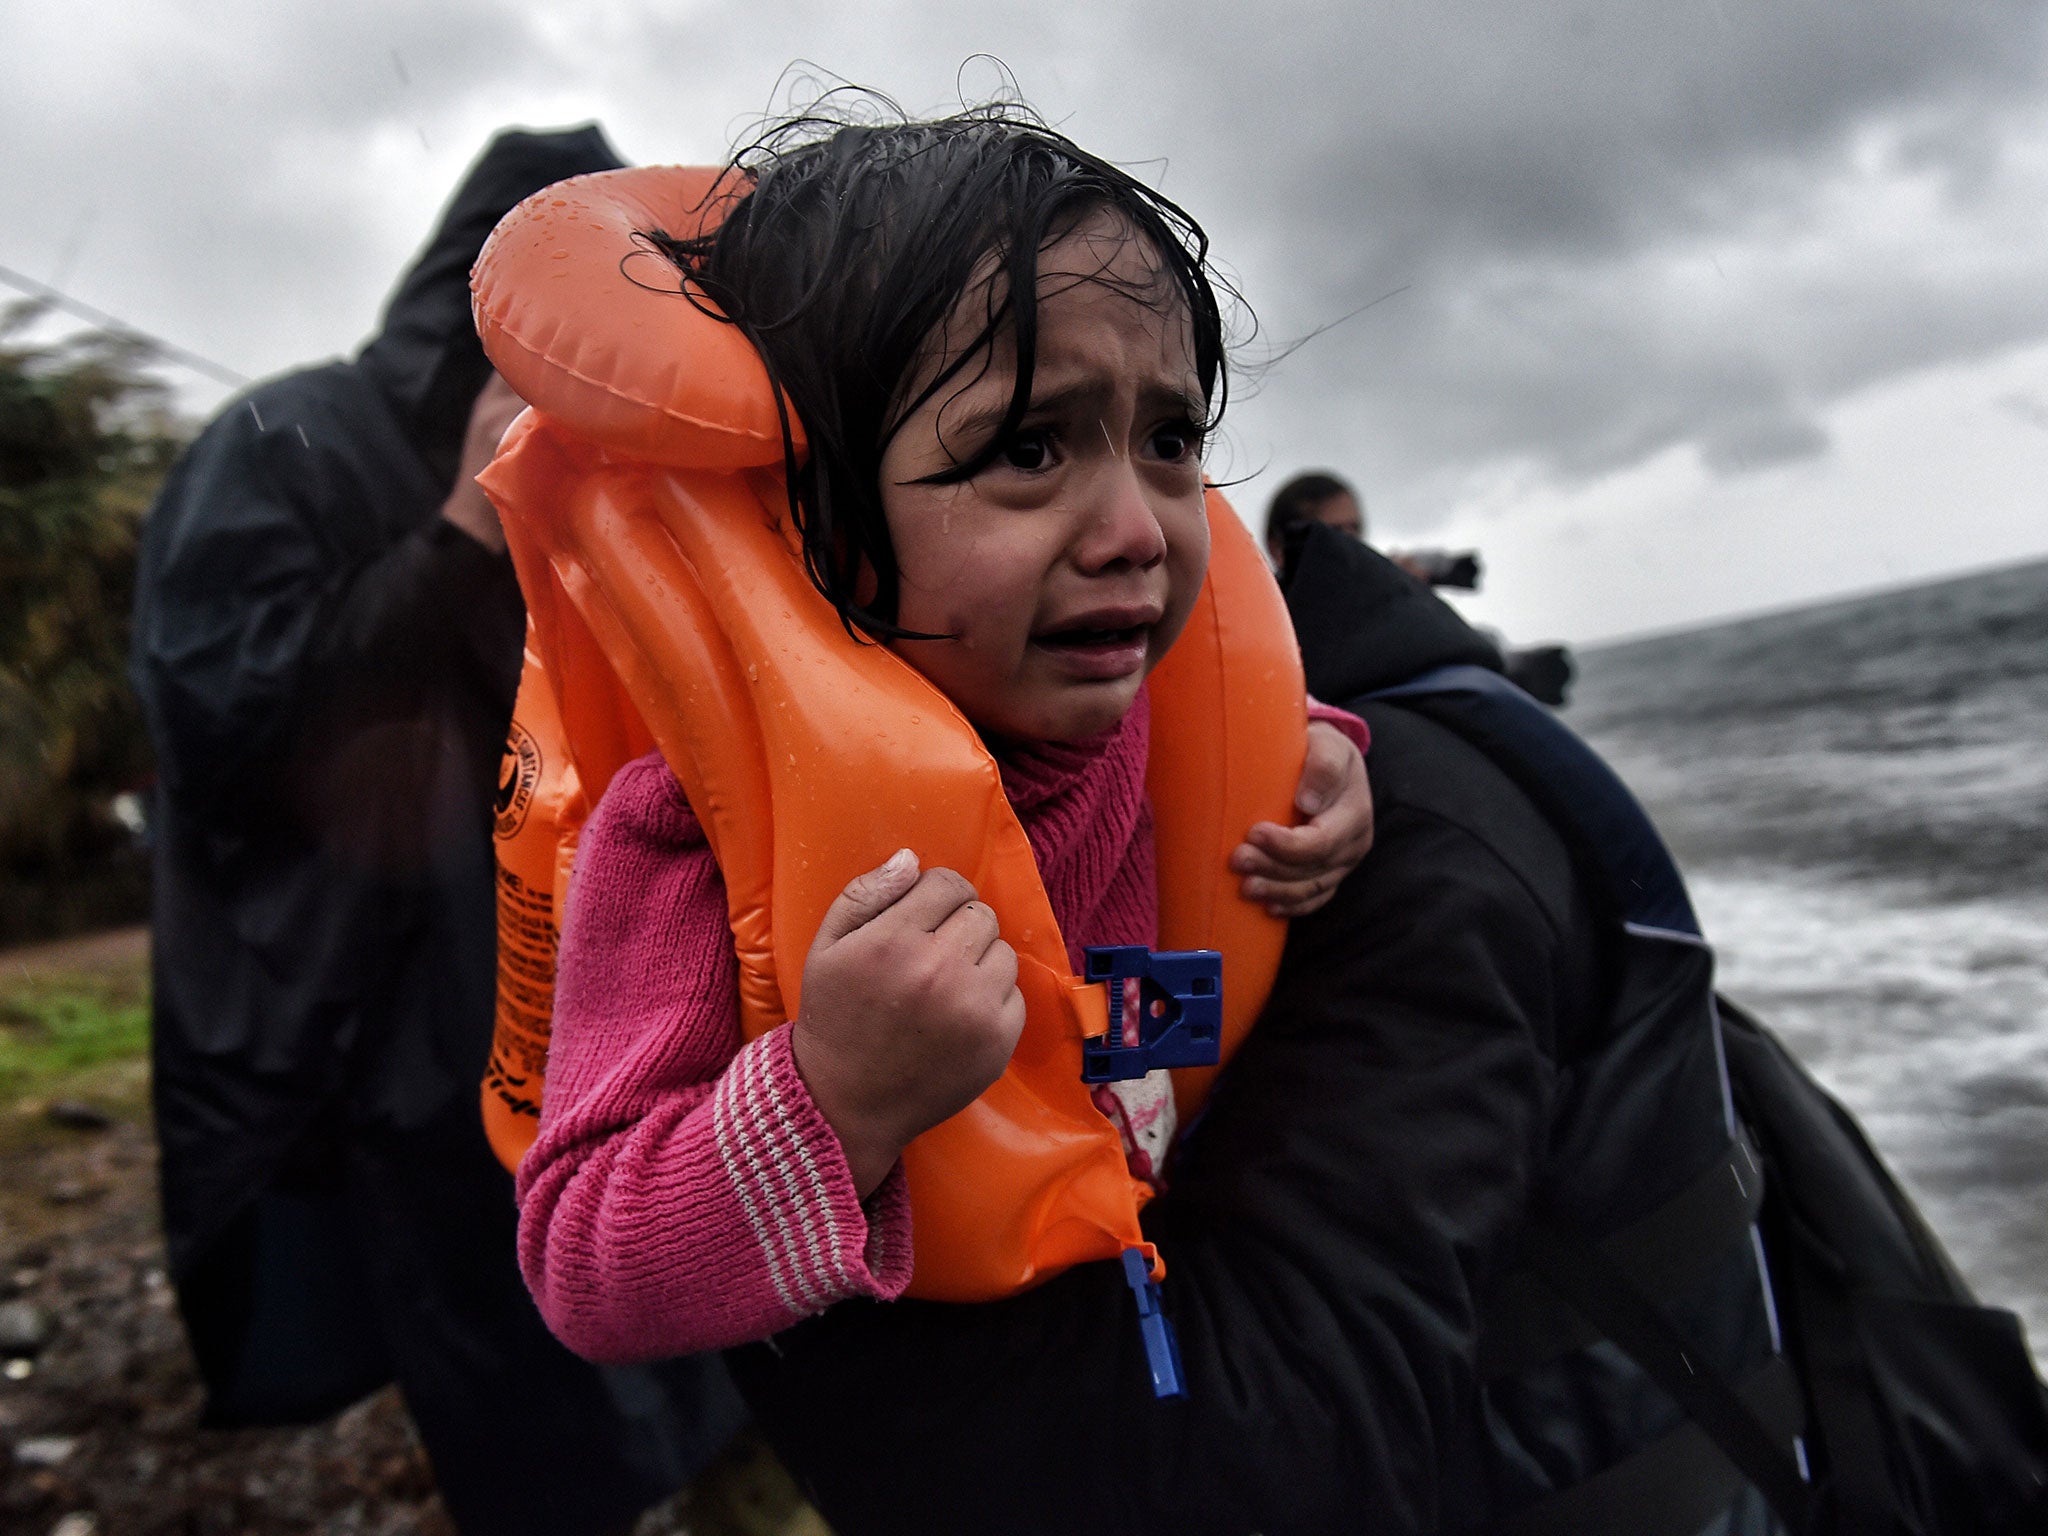 Refugees and migrants arrive at Lesbos island after crossing the Aegean sea from Turkey on 23 October 2015